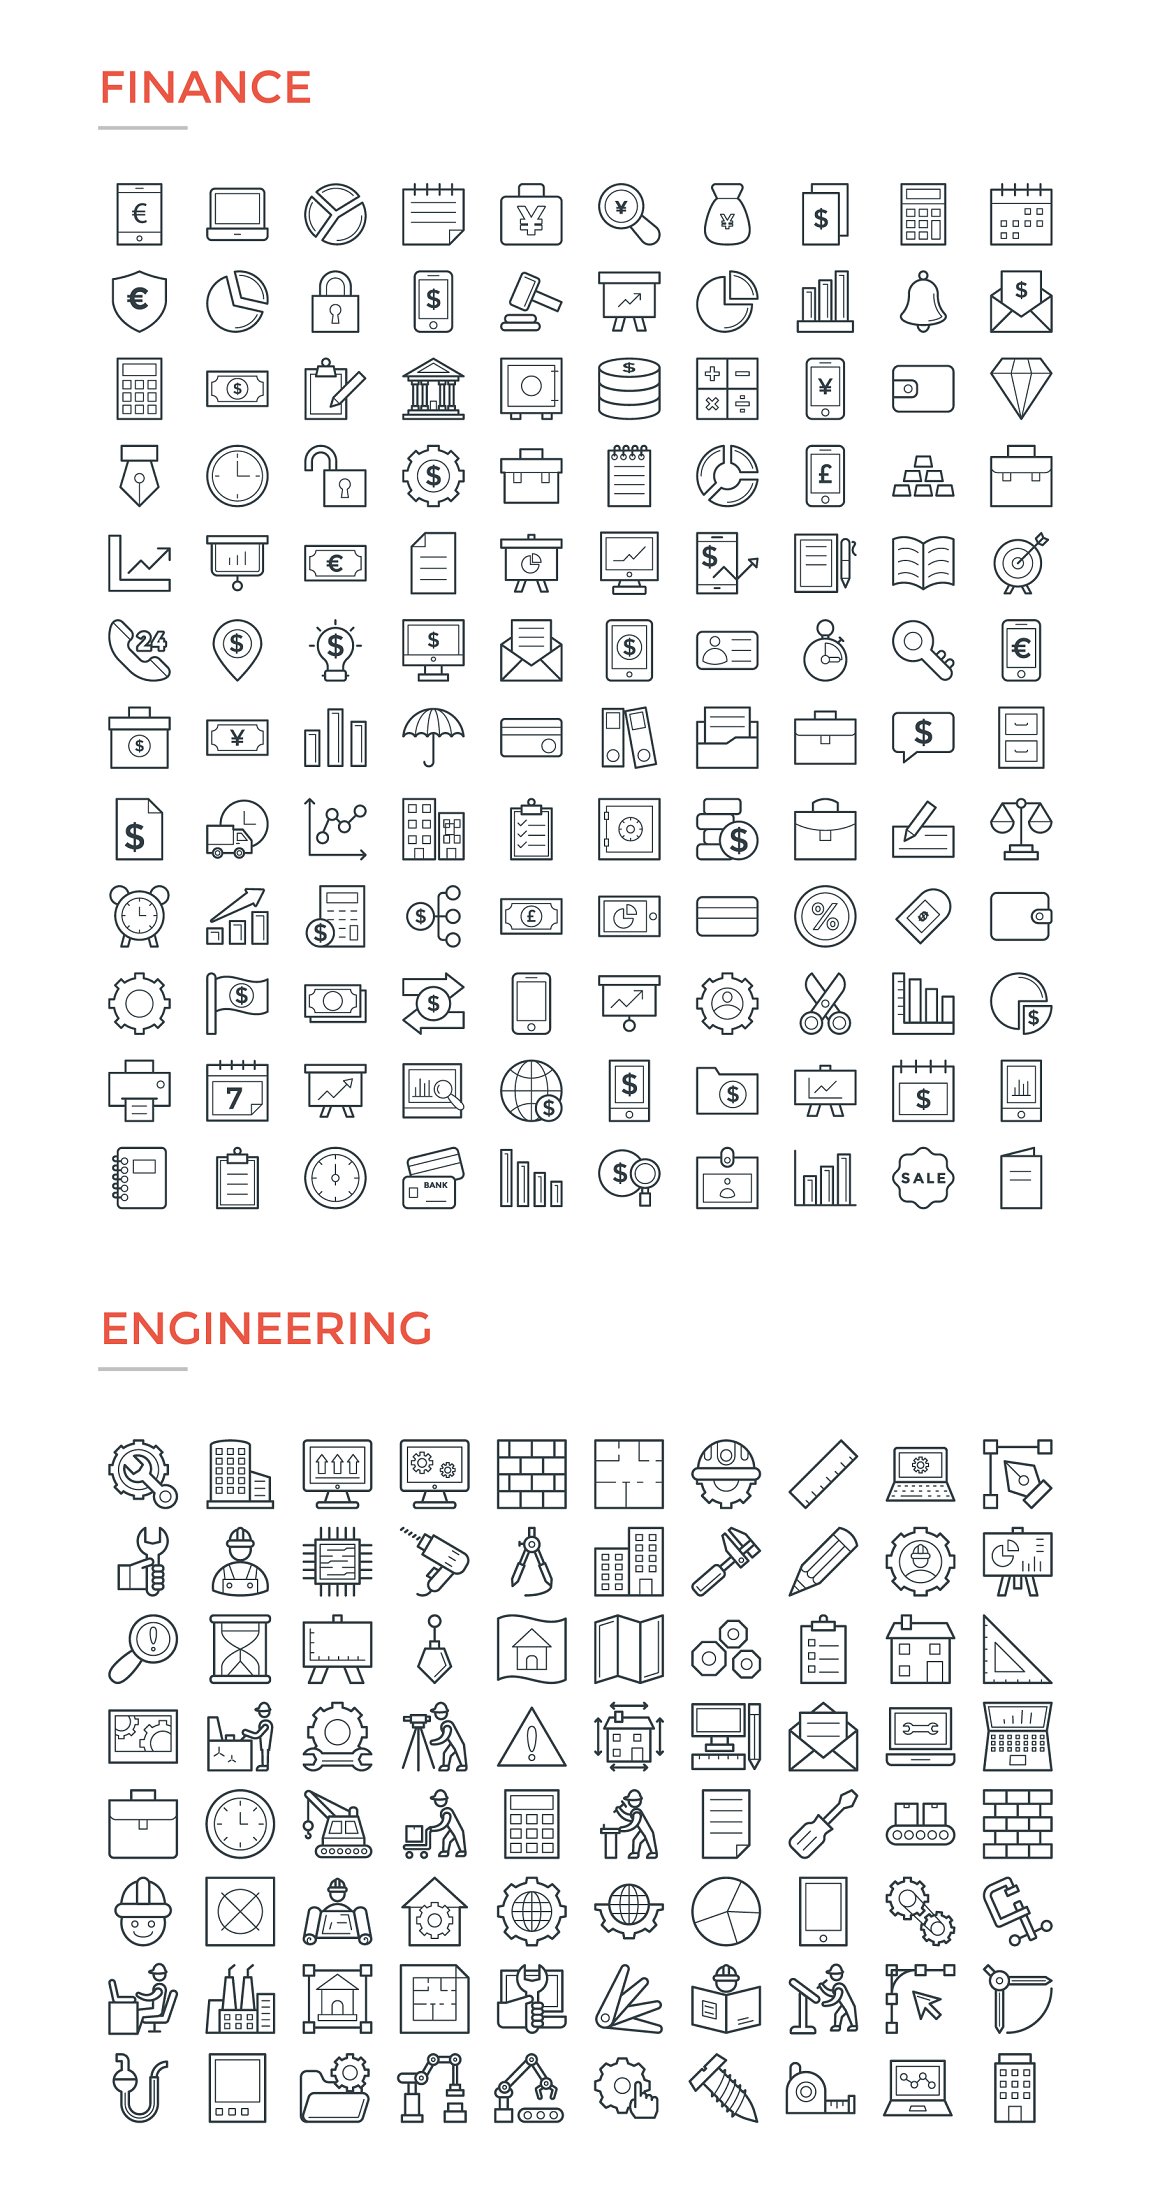 Clipart of finance and engineering icons on a white background.